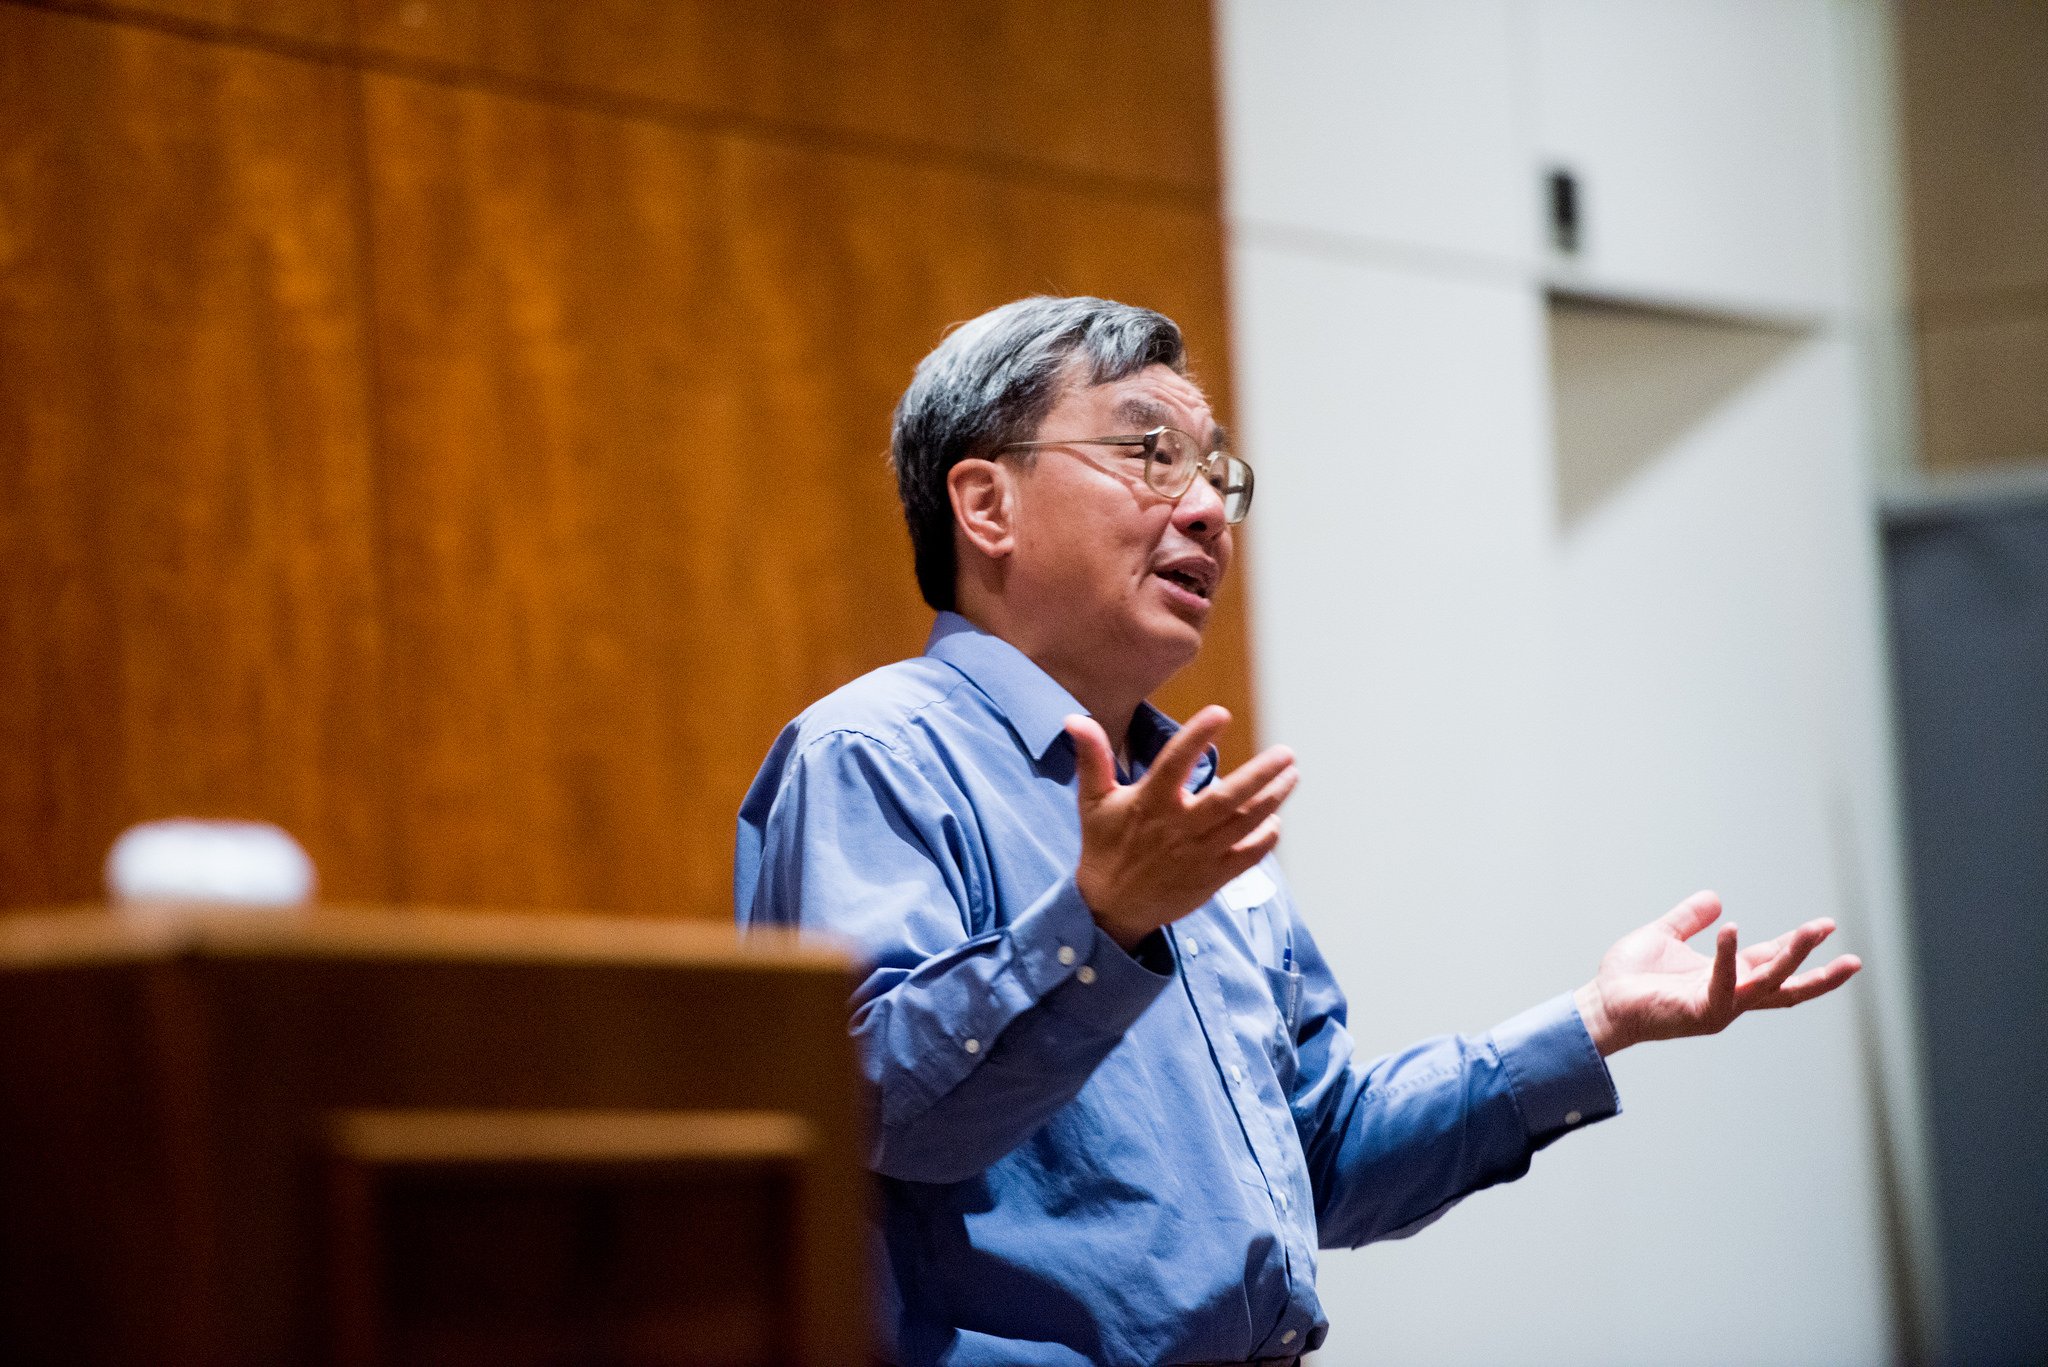 LBJ Professor Pat Wong giving a talk in Bass Lecture Hall during orientation on Aug. 7, 2016